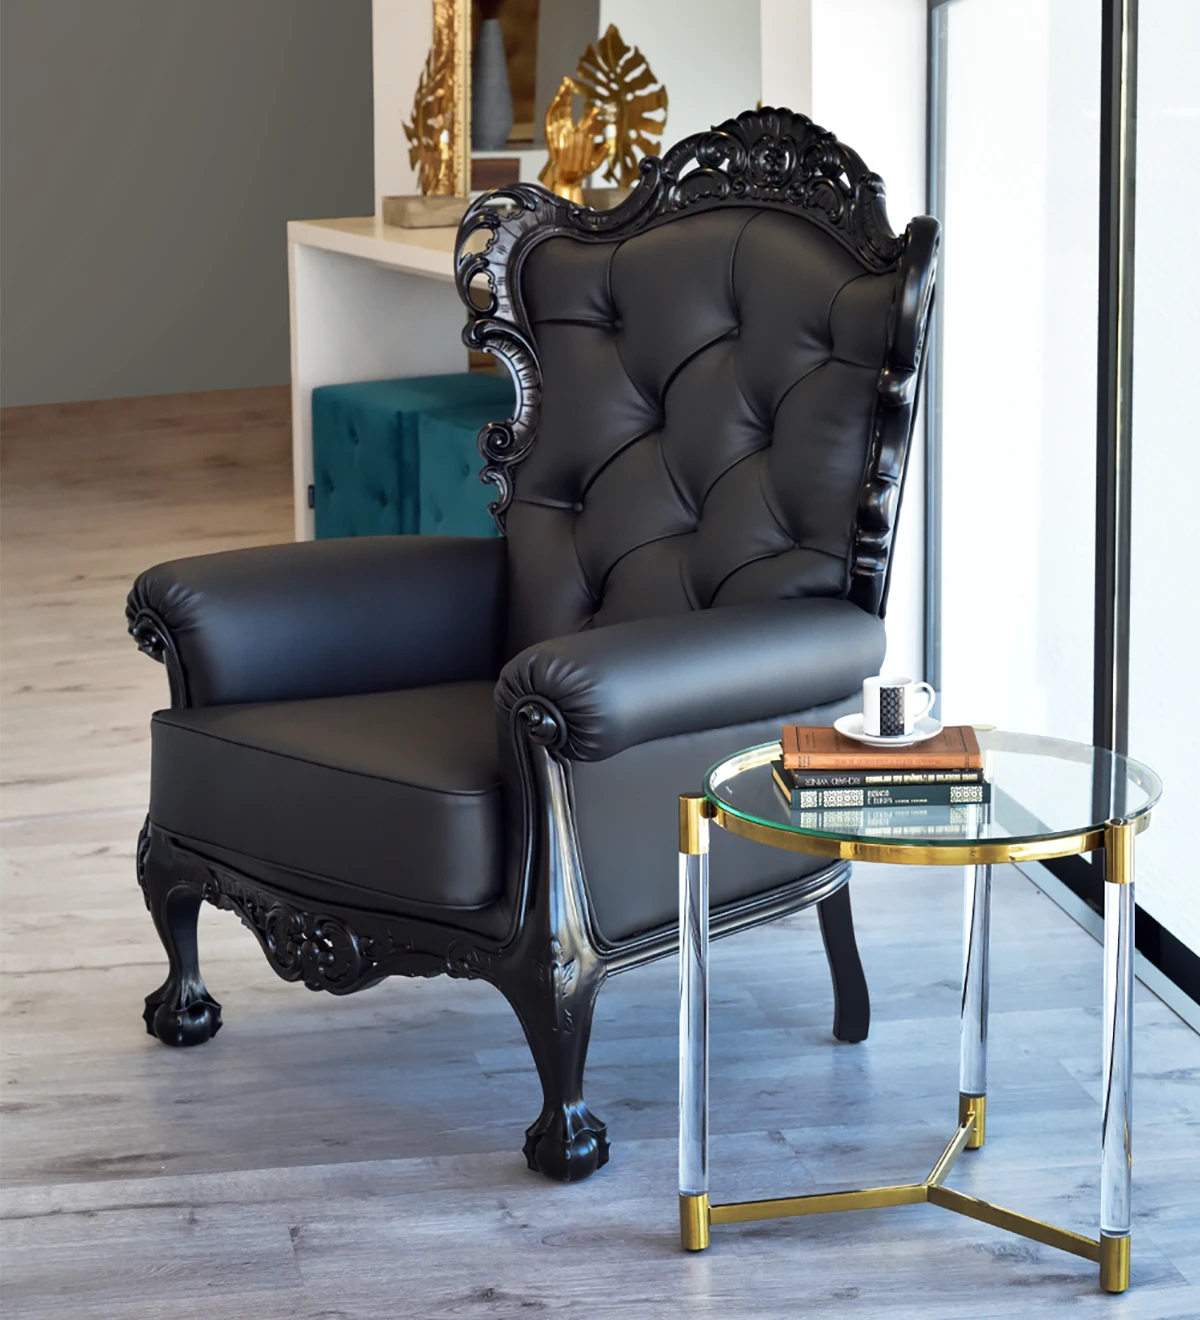 Upholstered in fabric, black lacquered structure.